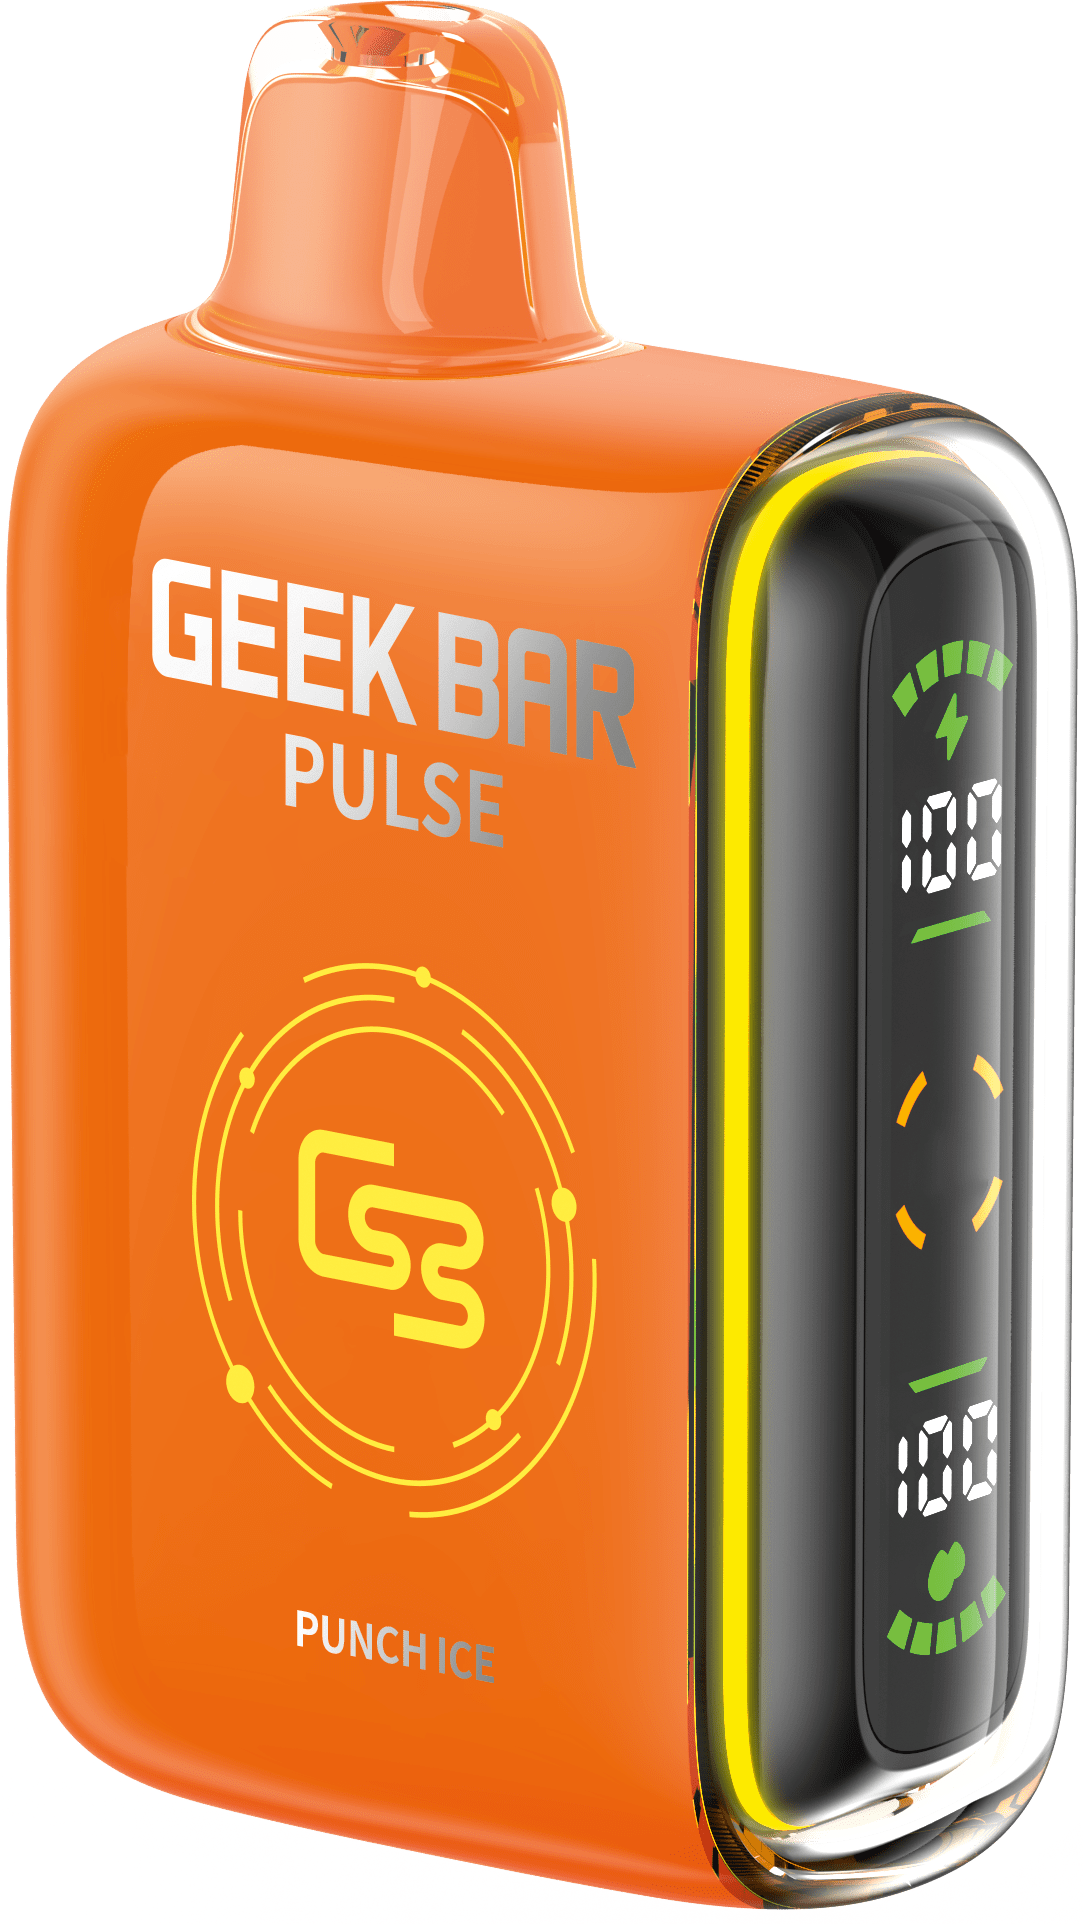 Geek Bar Pulse - Punch Ice Disposable Vape available on Canada online vape shop